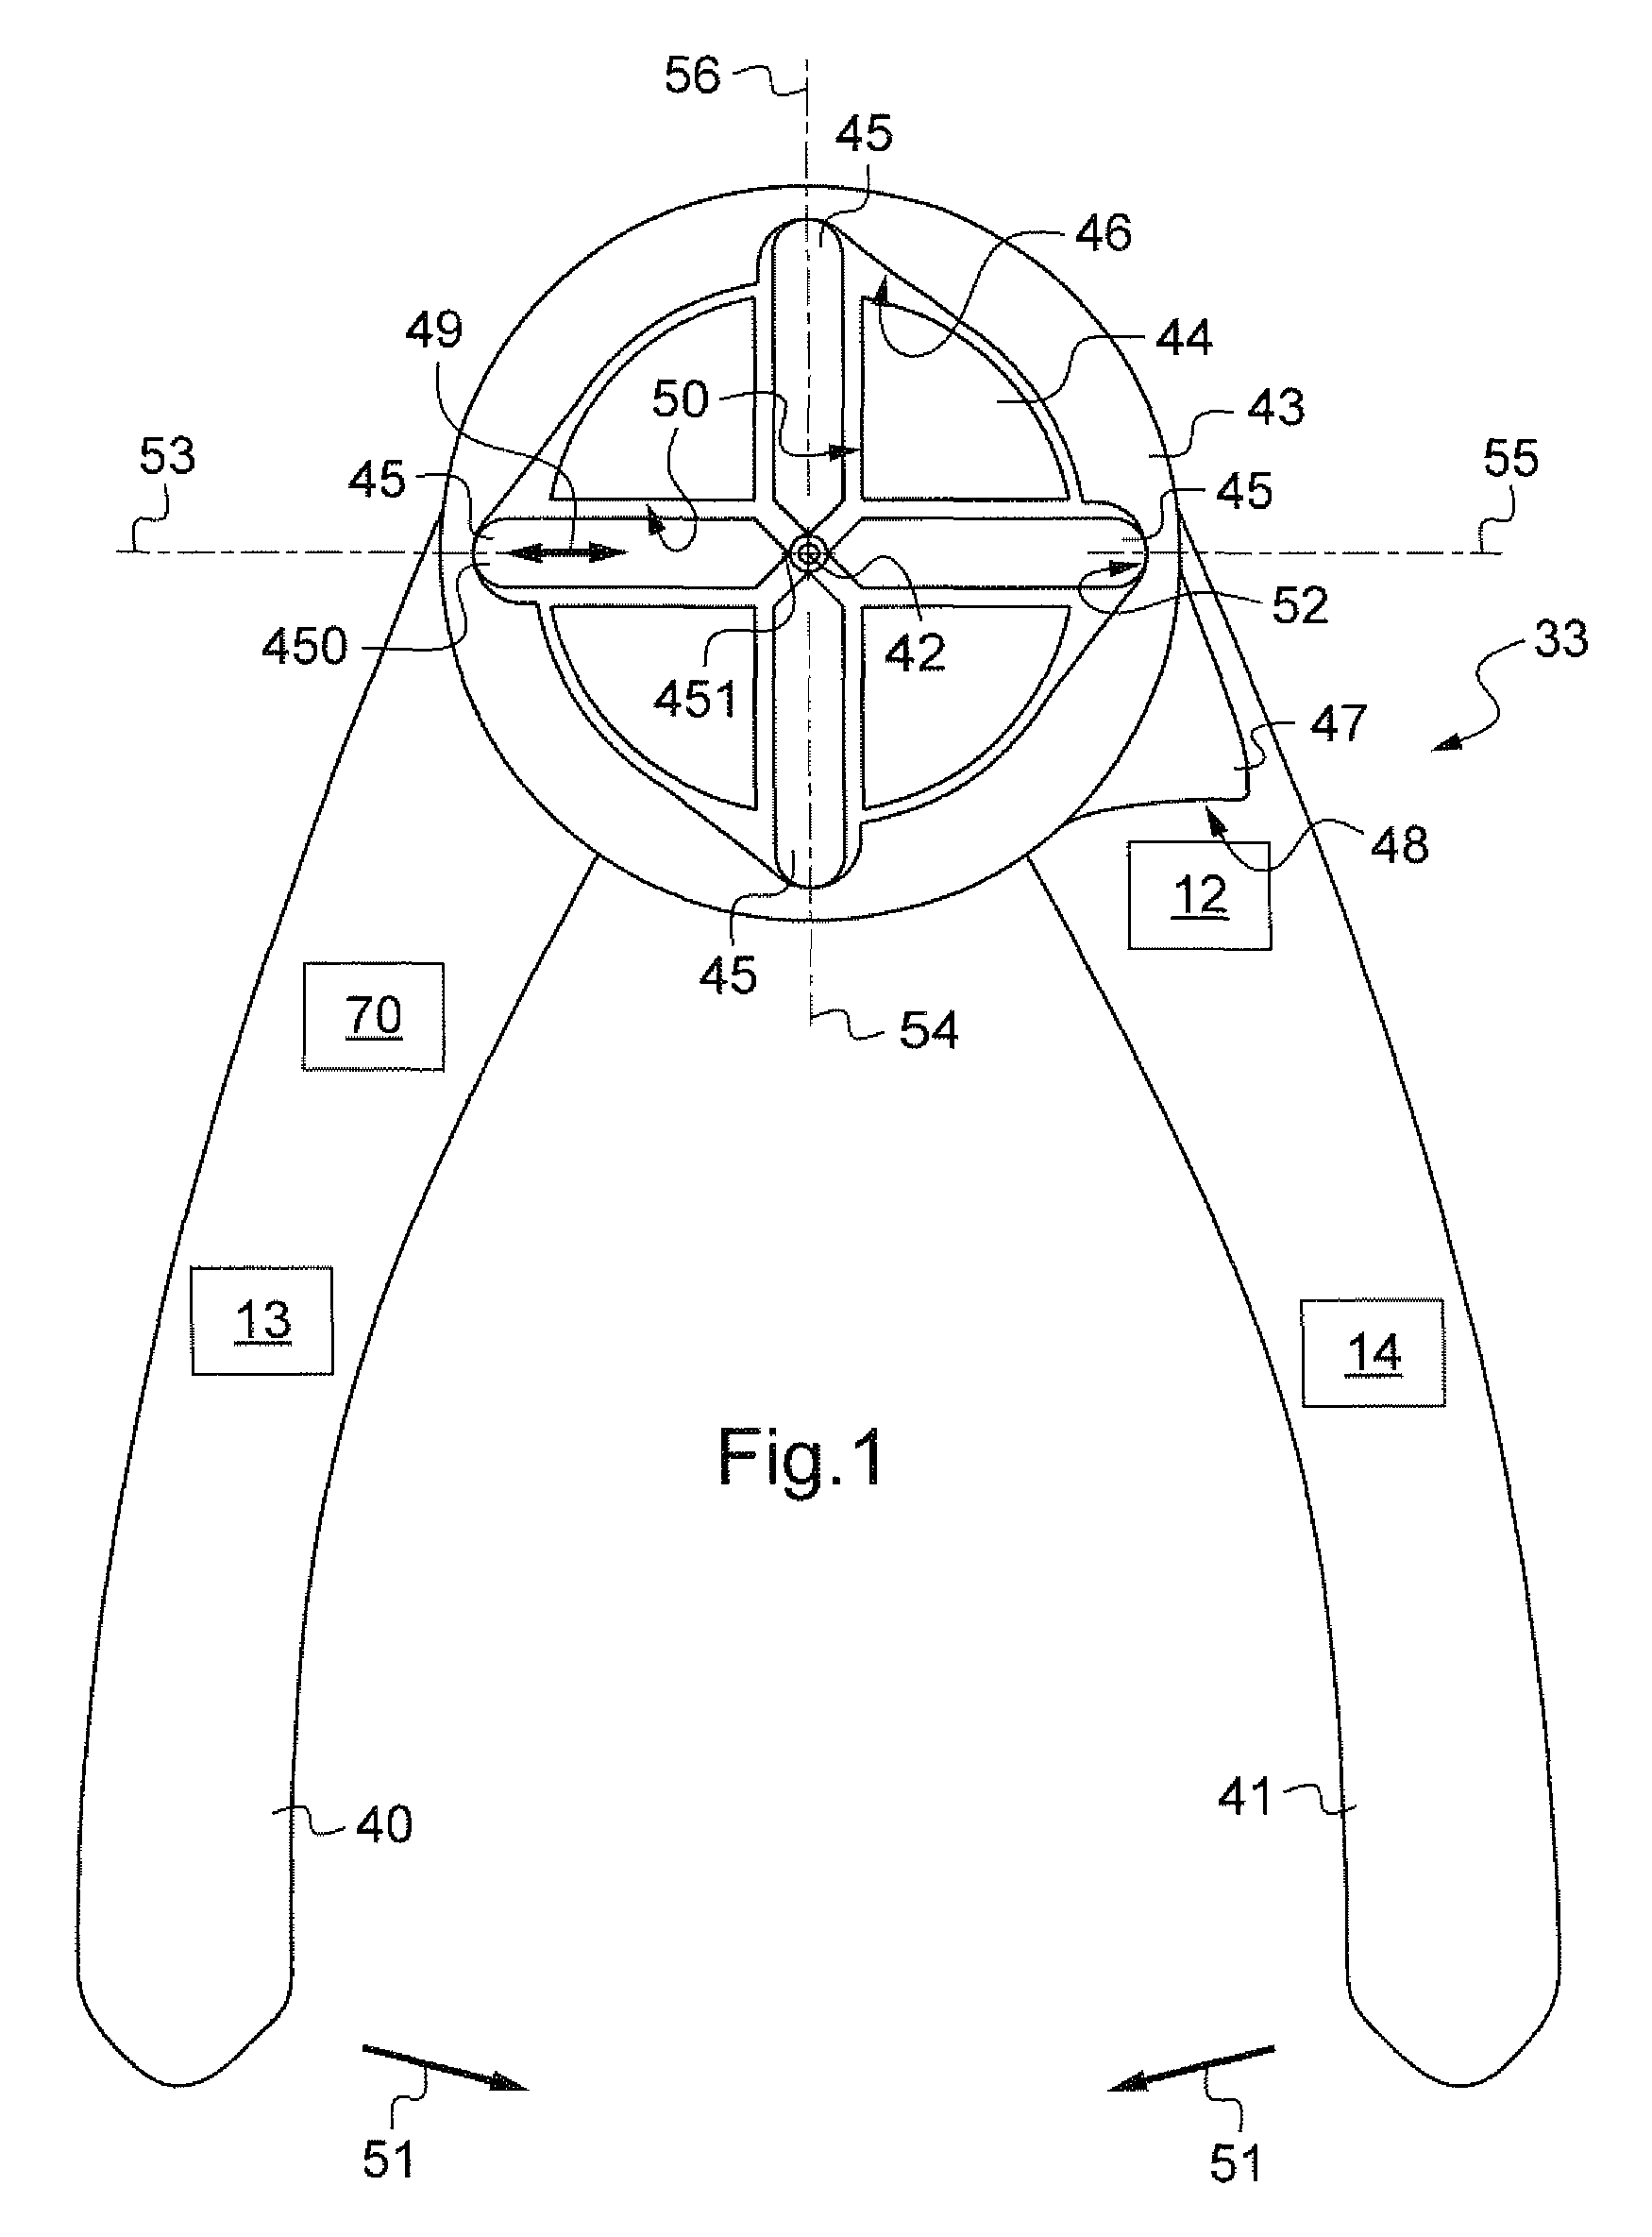 Crimping system with integrated monitoring